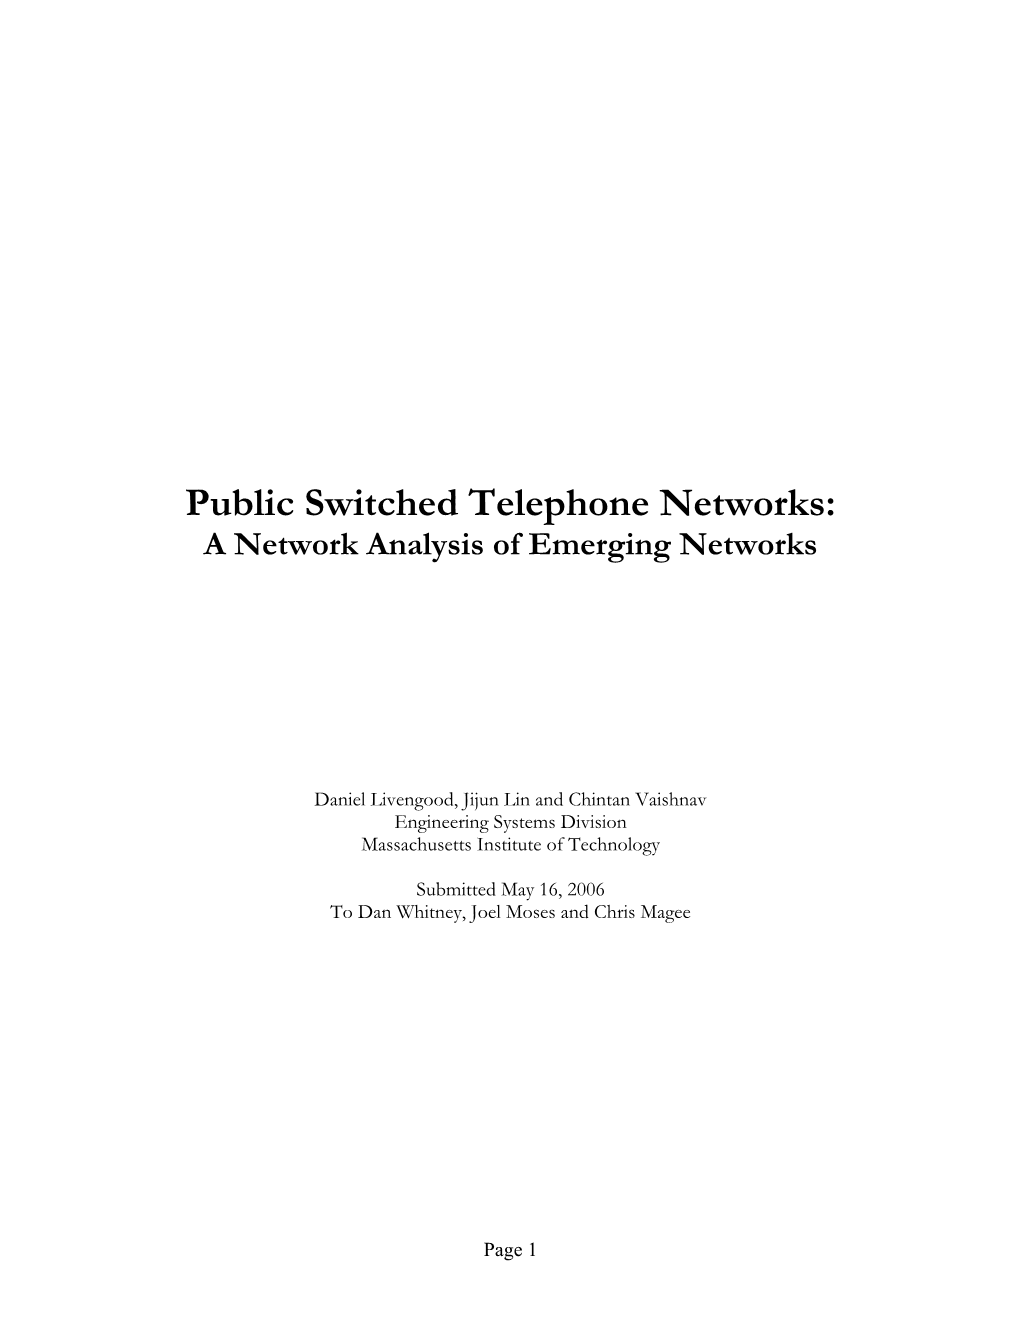 Public Switched Telephone Networks: a Network Analysis of Emerging Networks